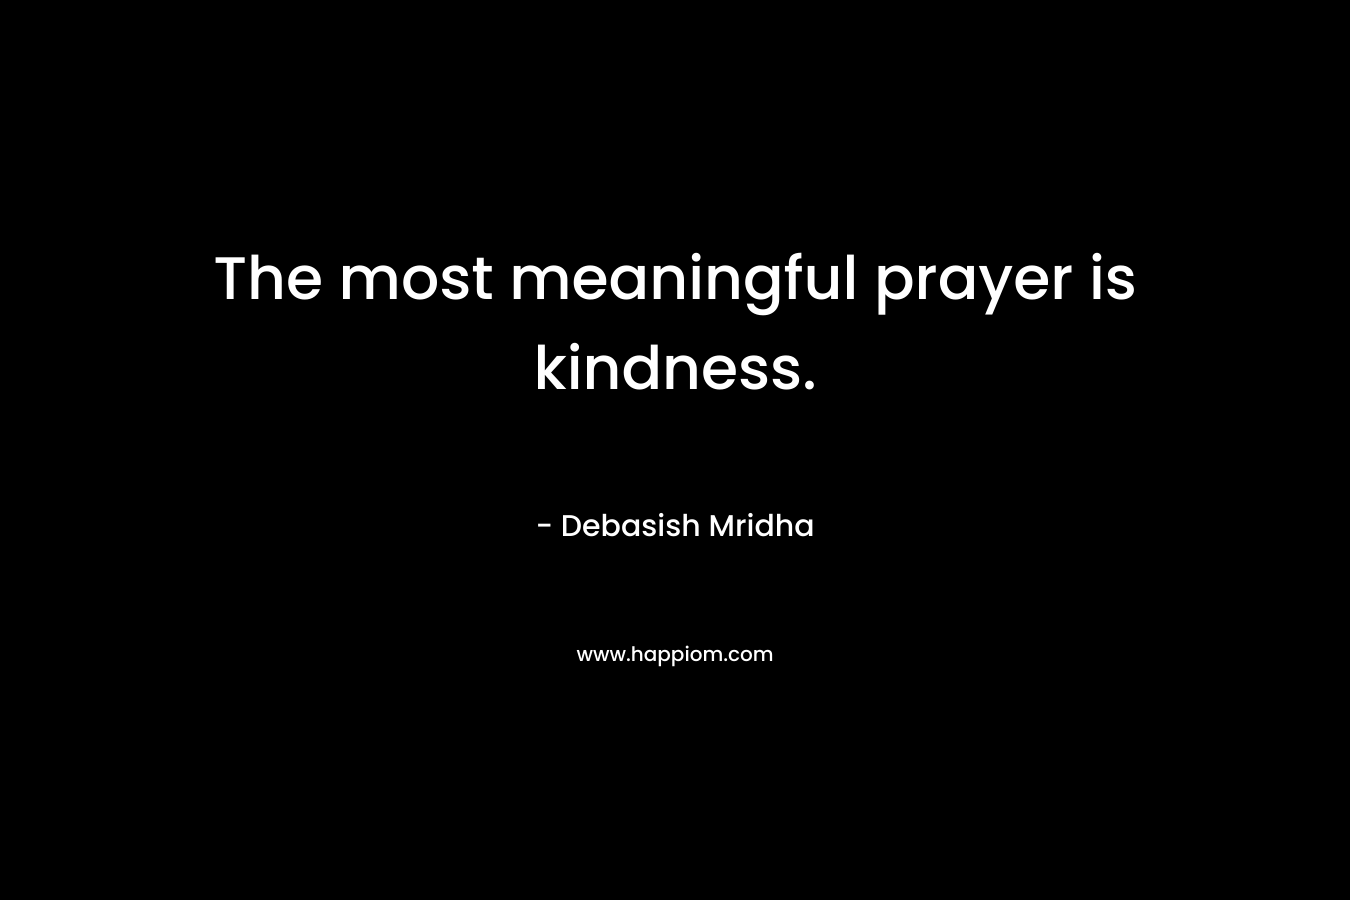 The most meaningful prayer is kindness.